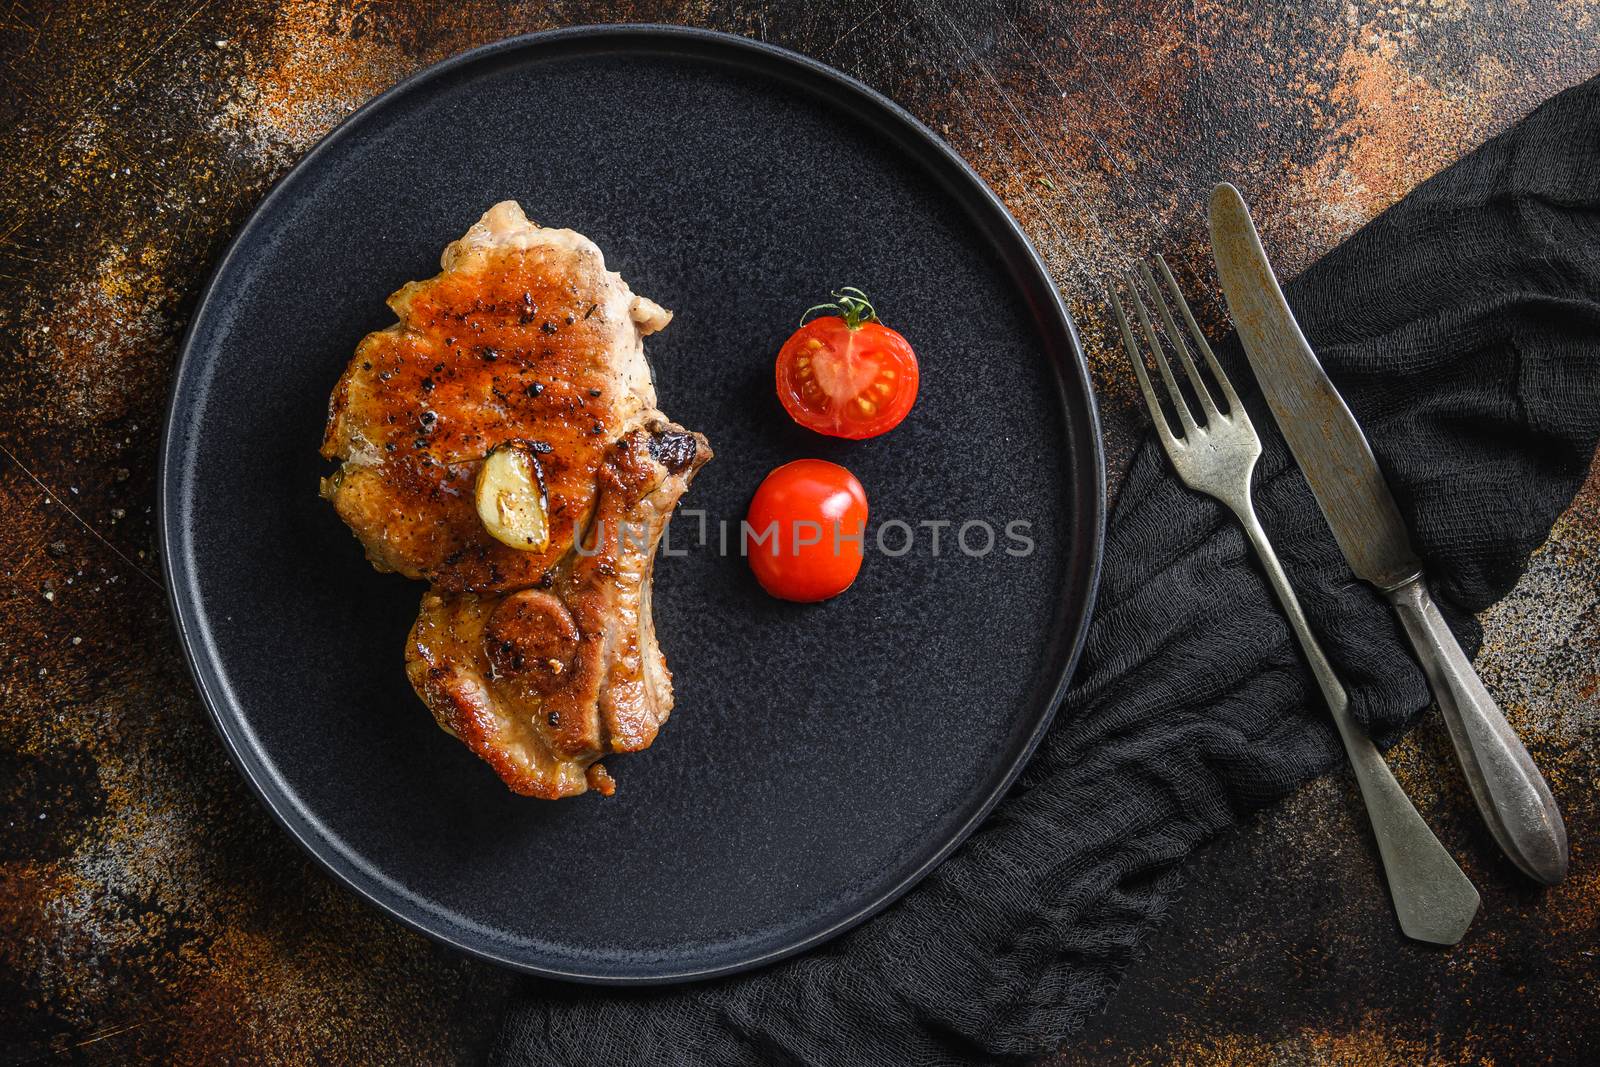 Grilled pork steak on the bone with seasonings on black dish with sfork and knife on cloth, over rustic metall surface overhead top view